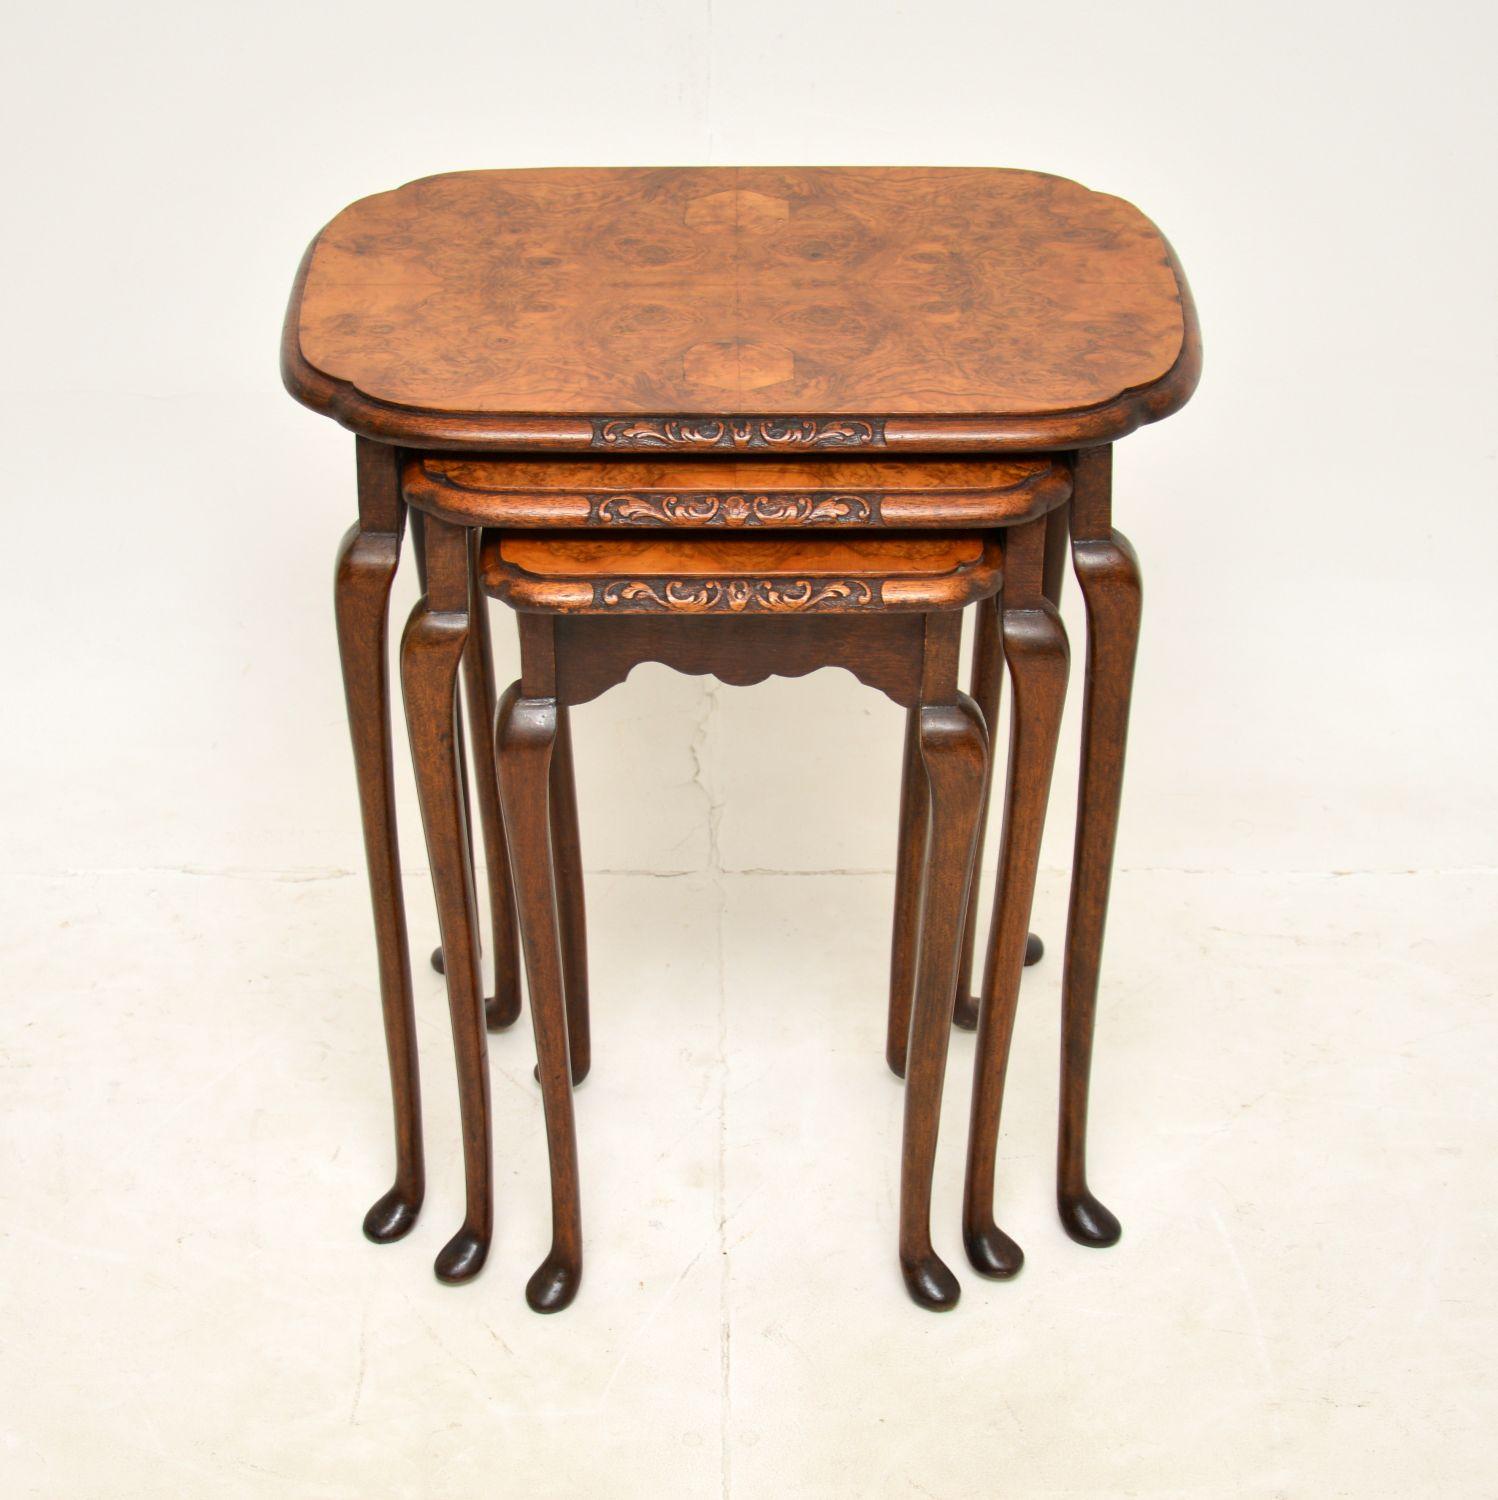 A beautiful set of three antique walnut nesting tables. They were made in England, and they date from around the 1920’s period.

The quality is fantastic, they are a very useful size with stunning burr walnut grain patterns and beautifully carved